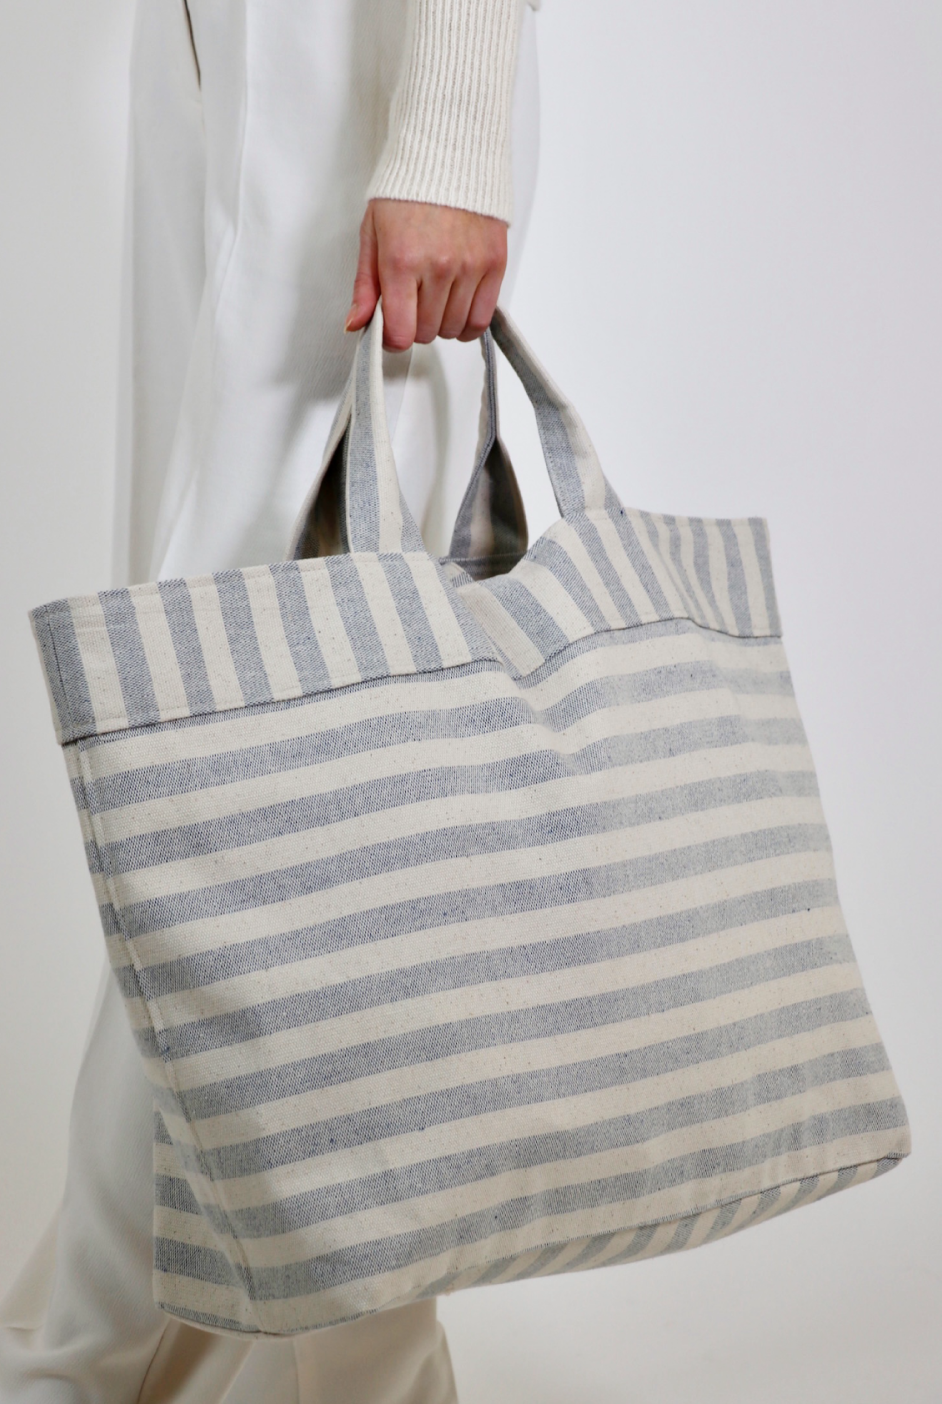 Columbia Tote Bag - Blue & off-white stripe – FURB Upcycled